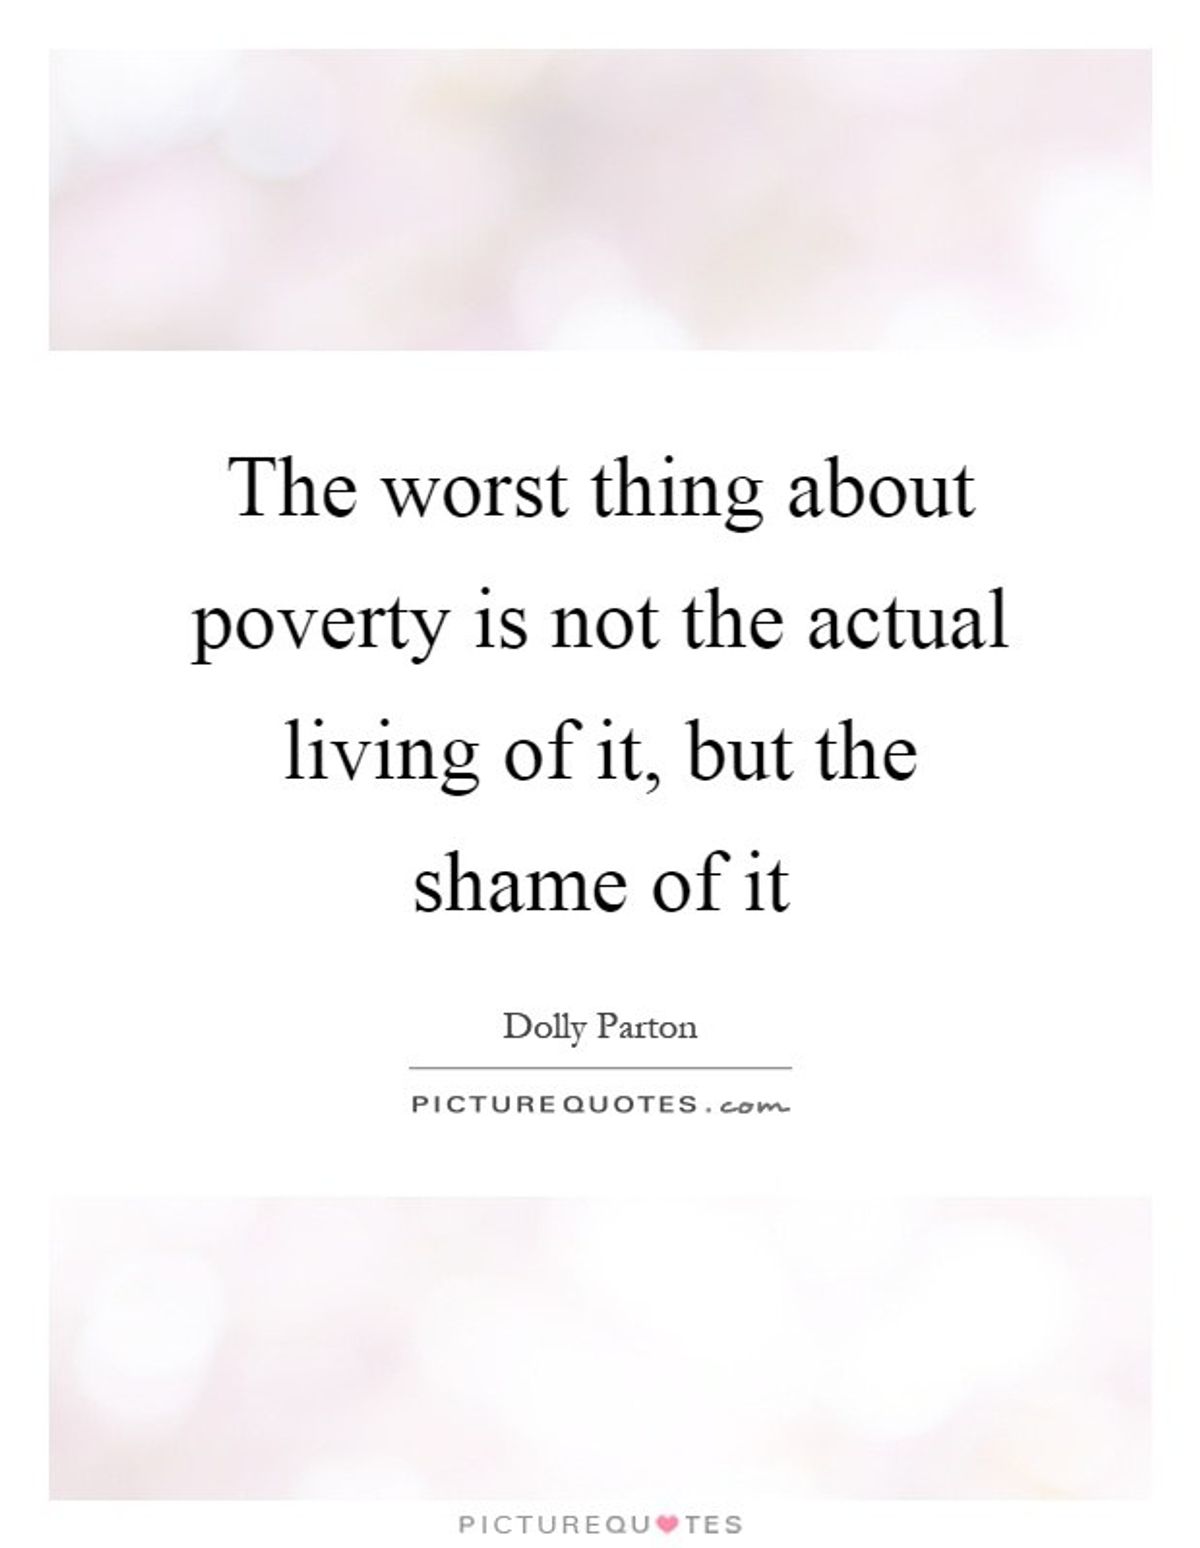 The Guilt And Shame Of Poverty